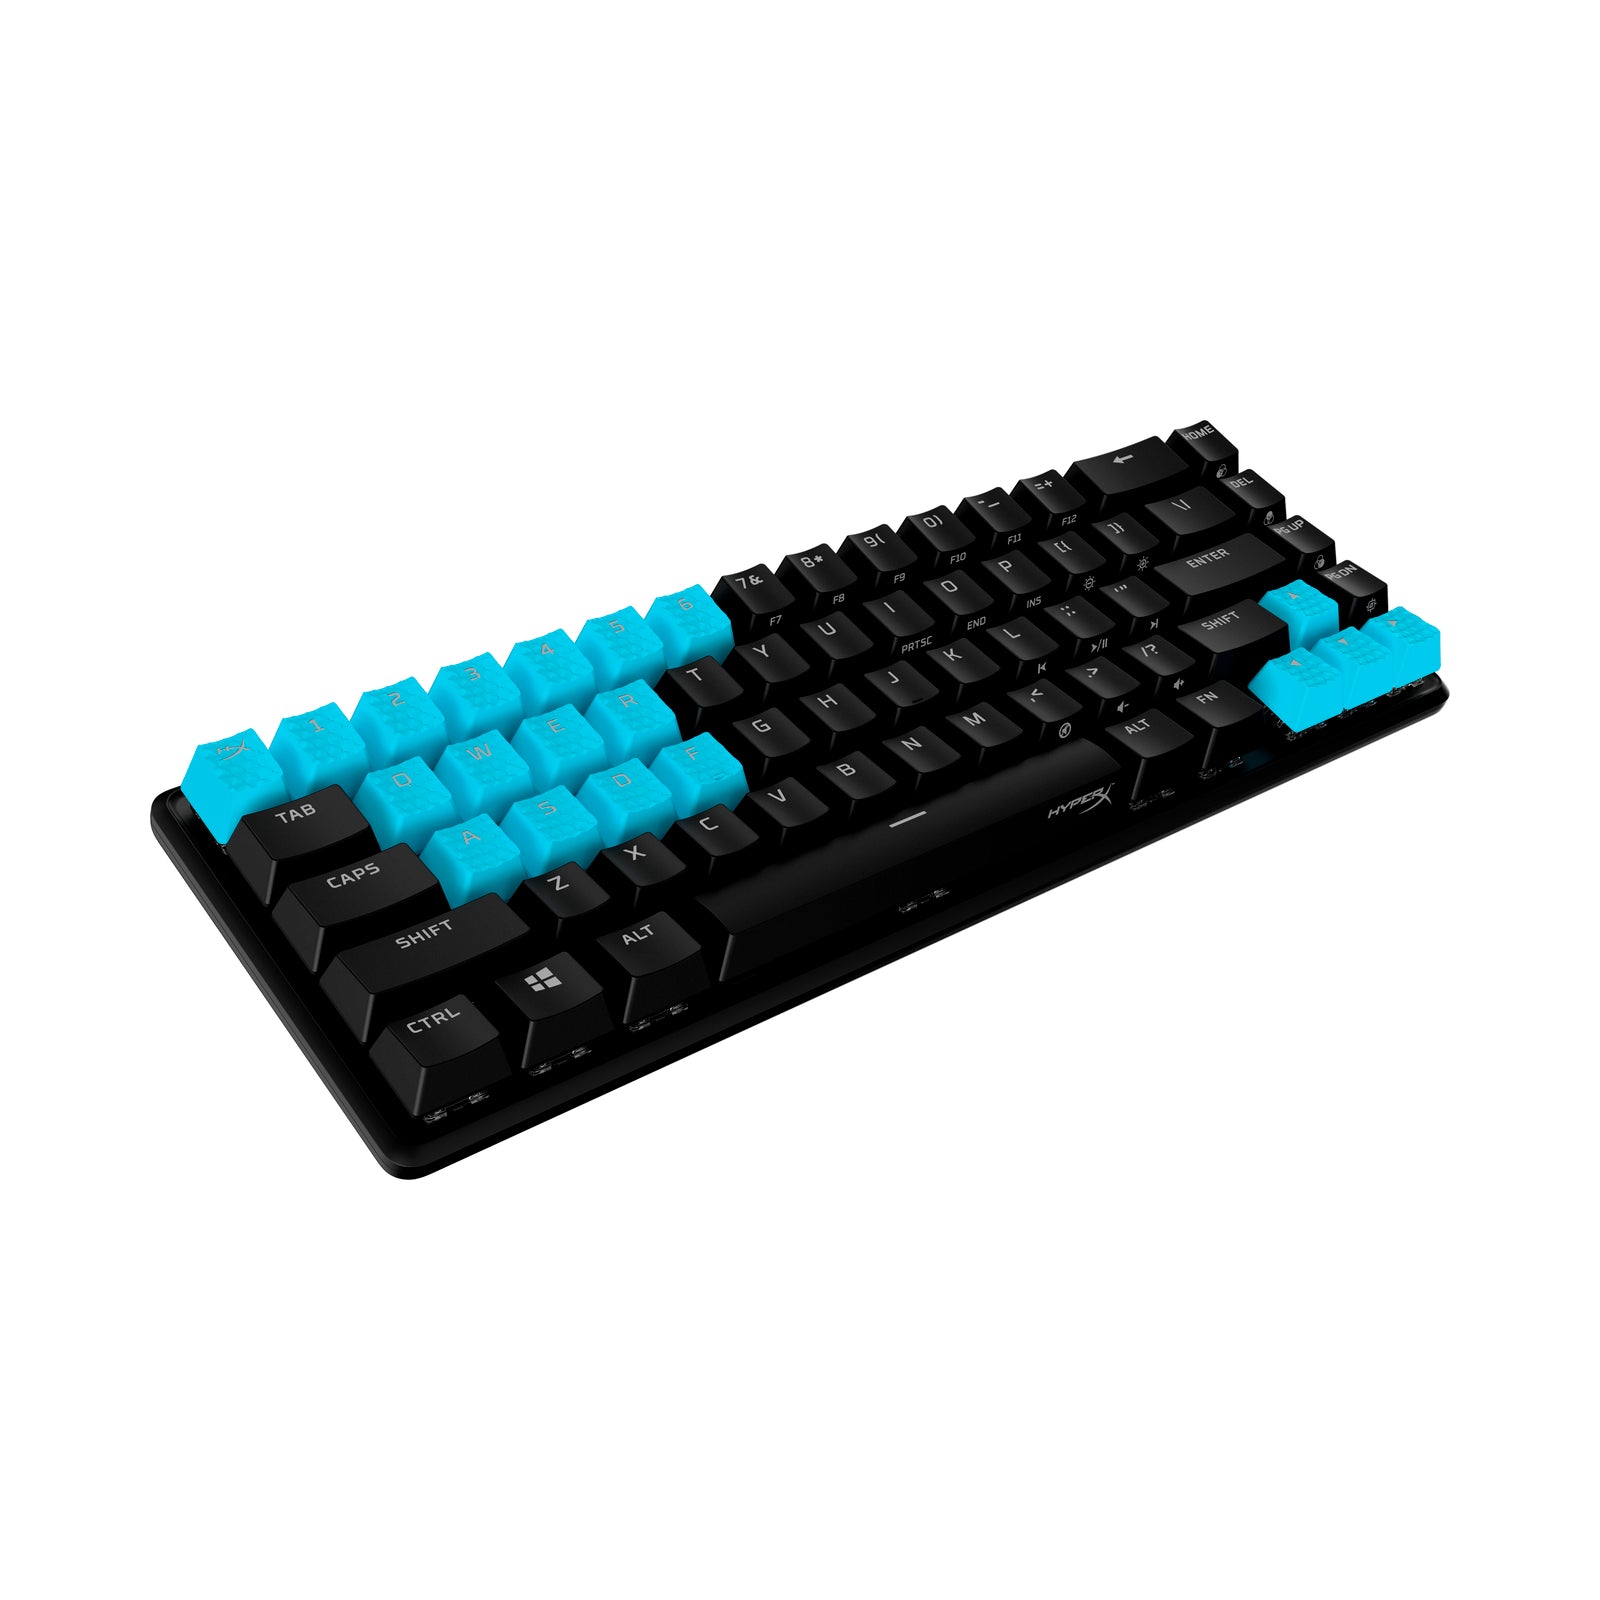 HyperX Rubber Keycaps - Gaming Accessory Kit - Blue (US Layout)